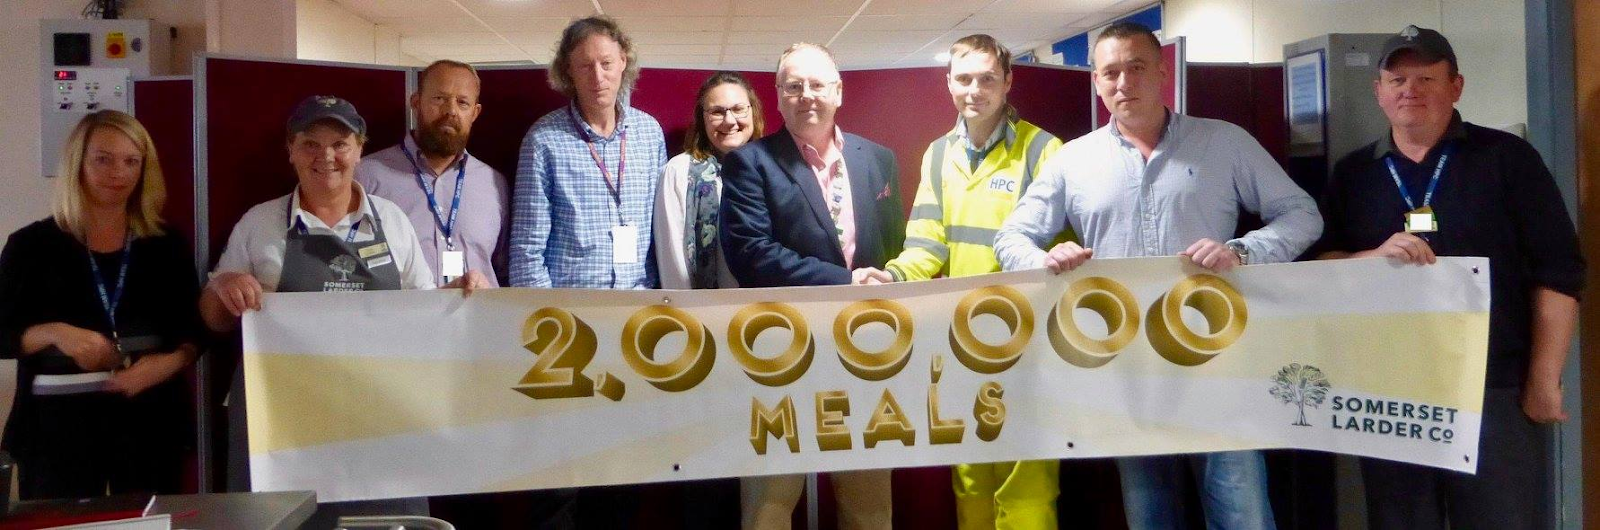 People Holding Banner 200,000 Meals